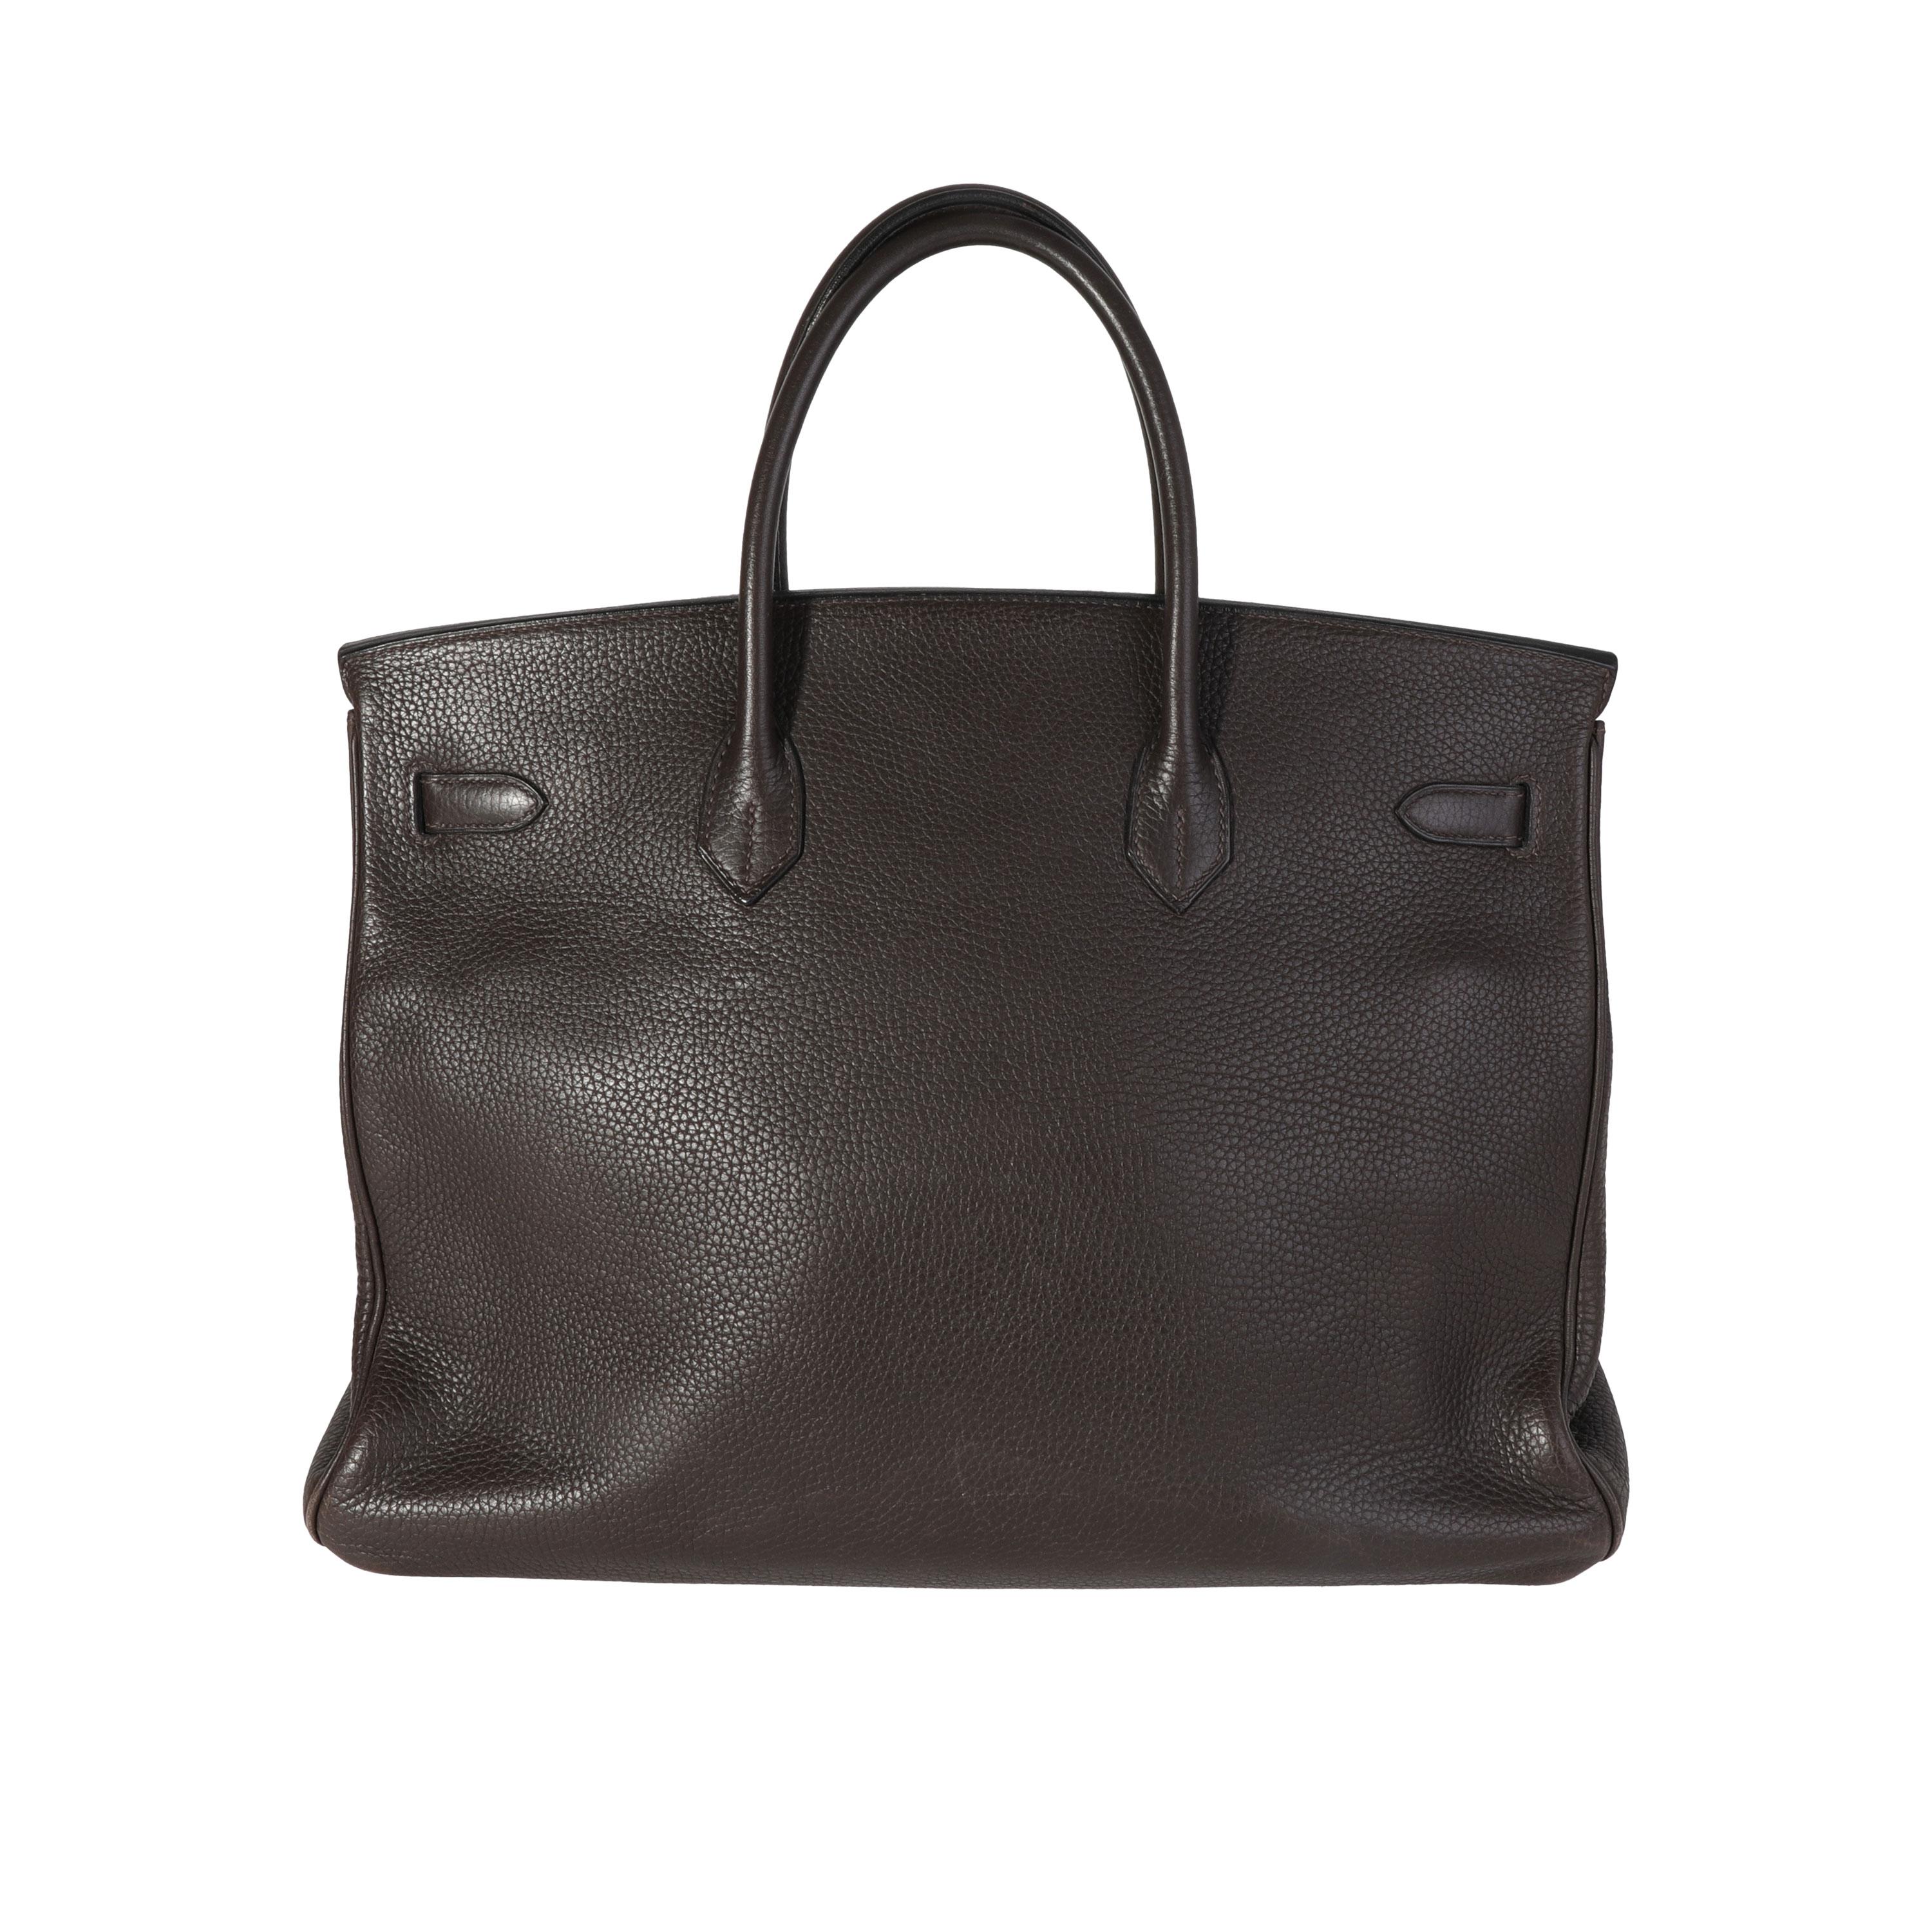 Listing Title: Hermès Chocolat Clémence Birkin 40 PHW
SKU: 117515
Condition: Pre-owned (3000)
Handbag Condition: Good
Condition Comments: Good Condition. Scuffing to corners and to exterior. Peeling and scuffing to handles. Water damage to exterior